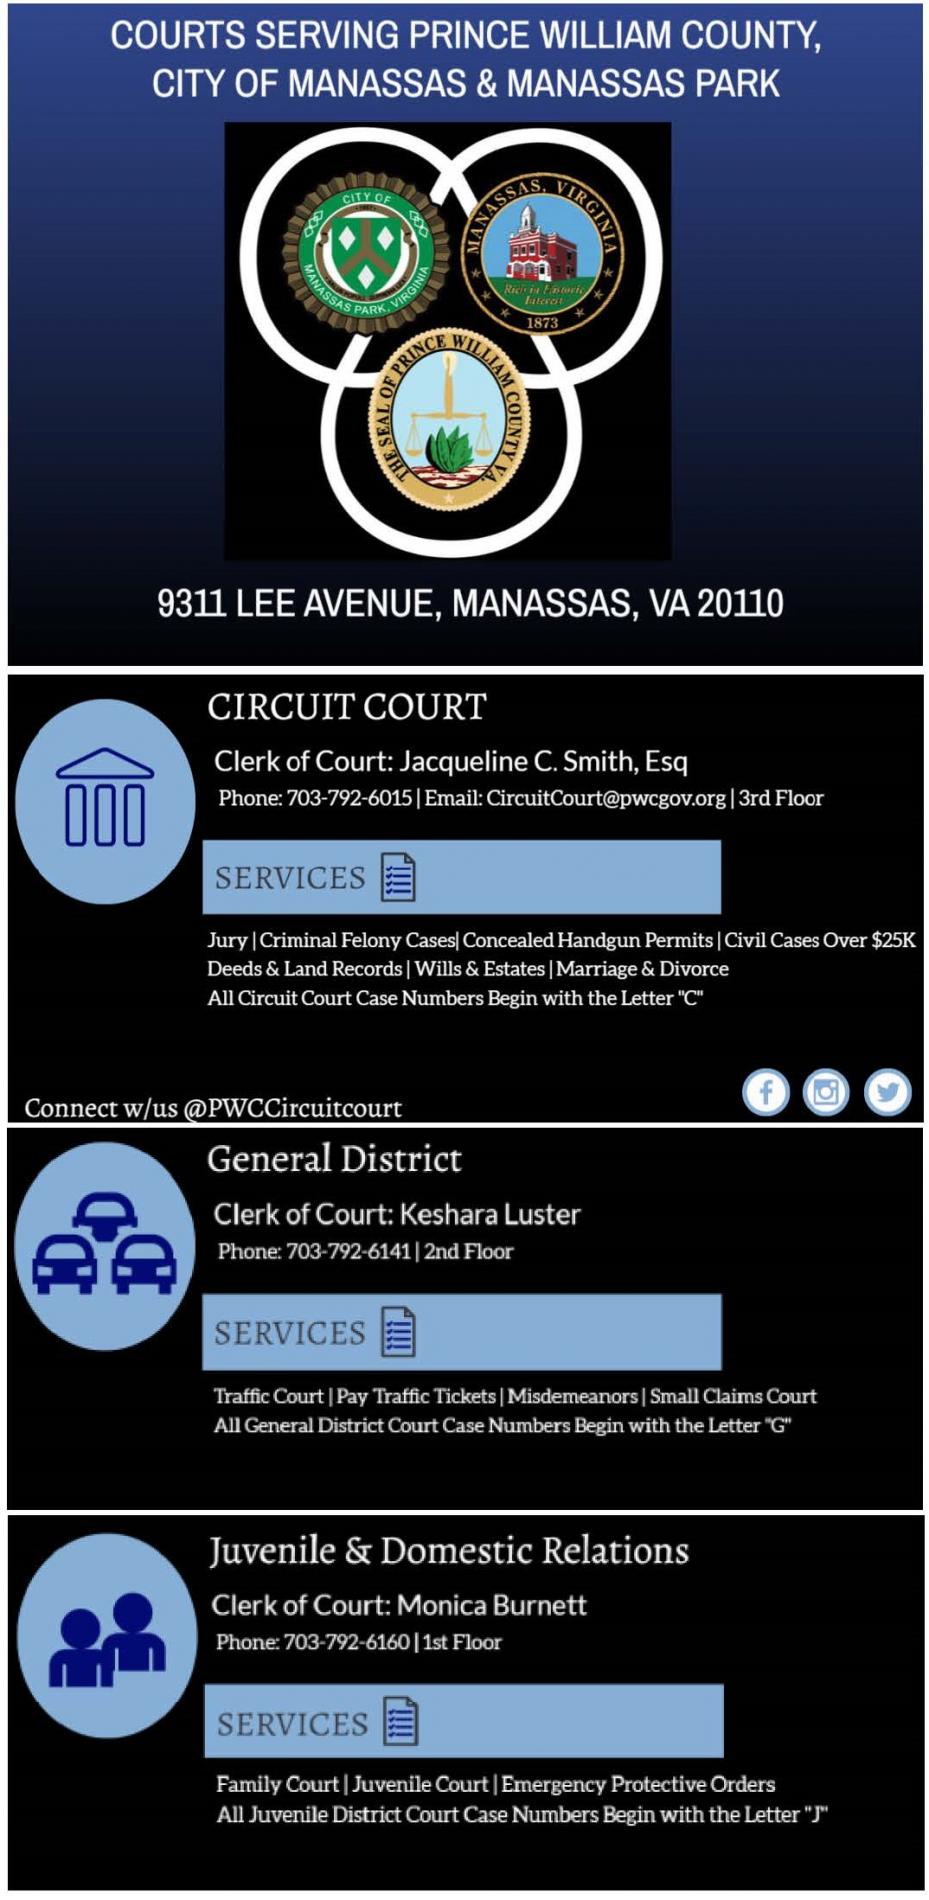 Courts & Services